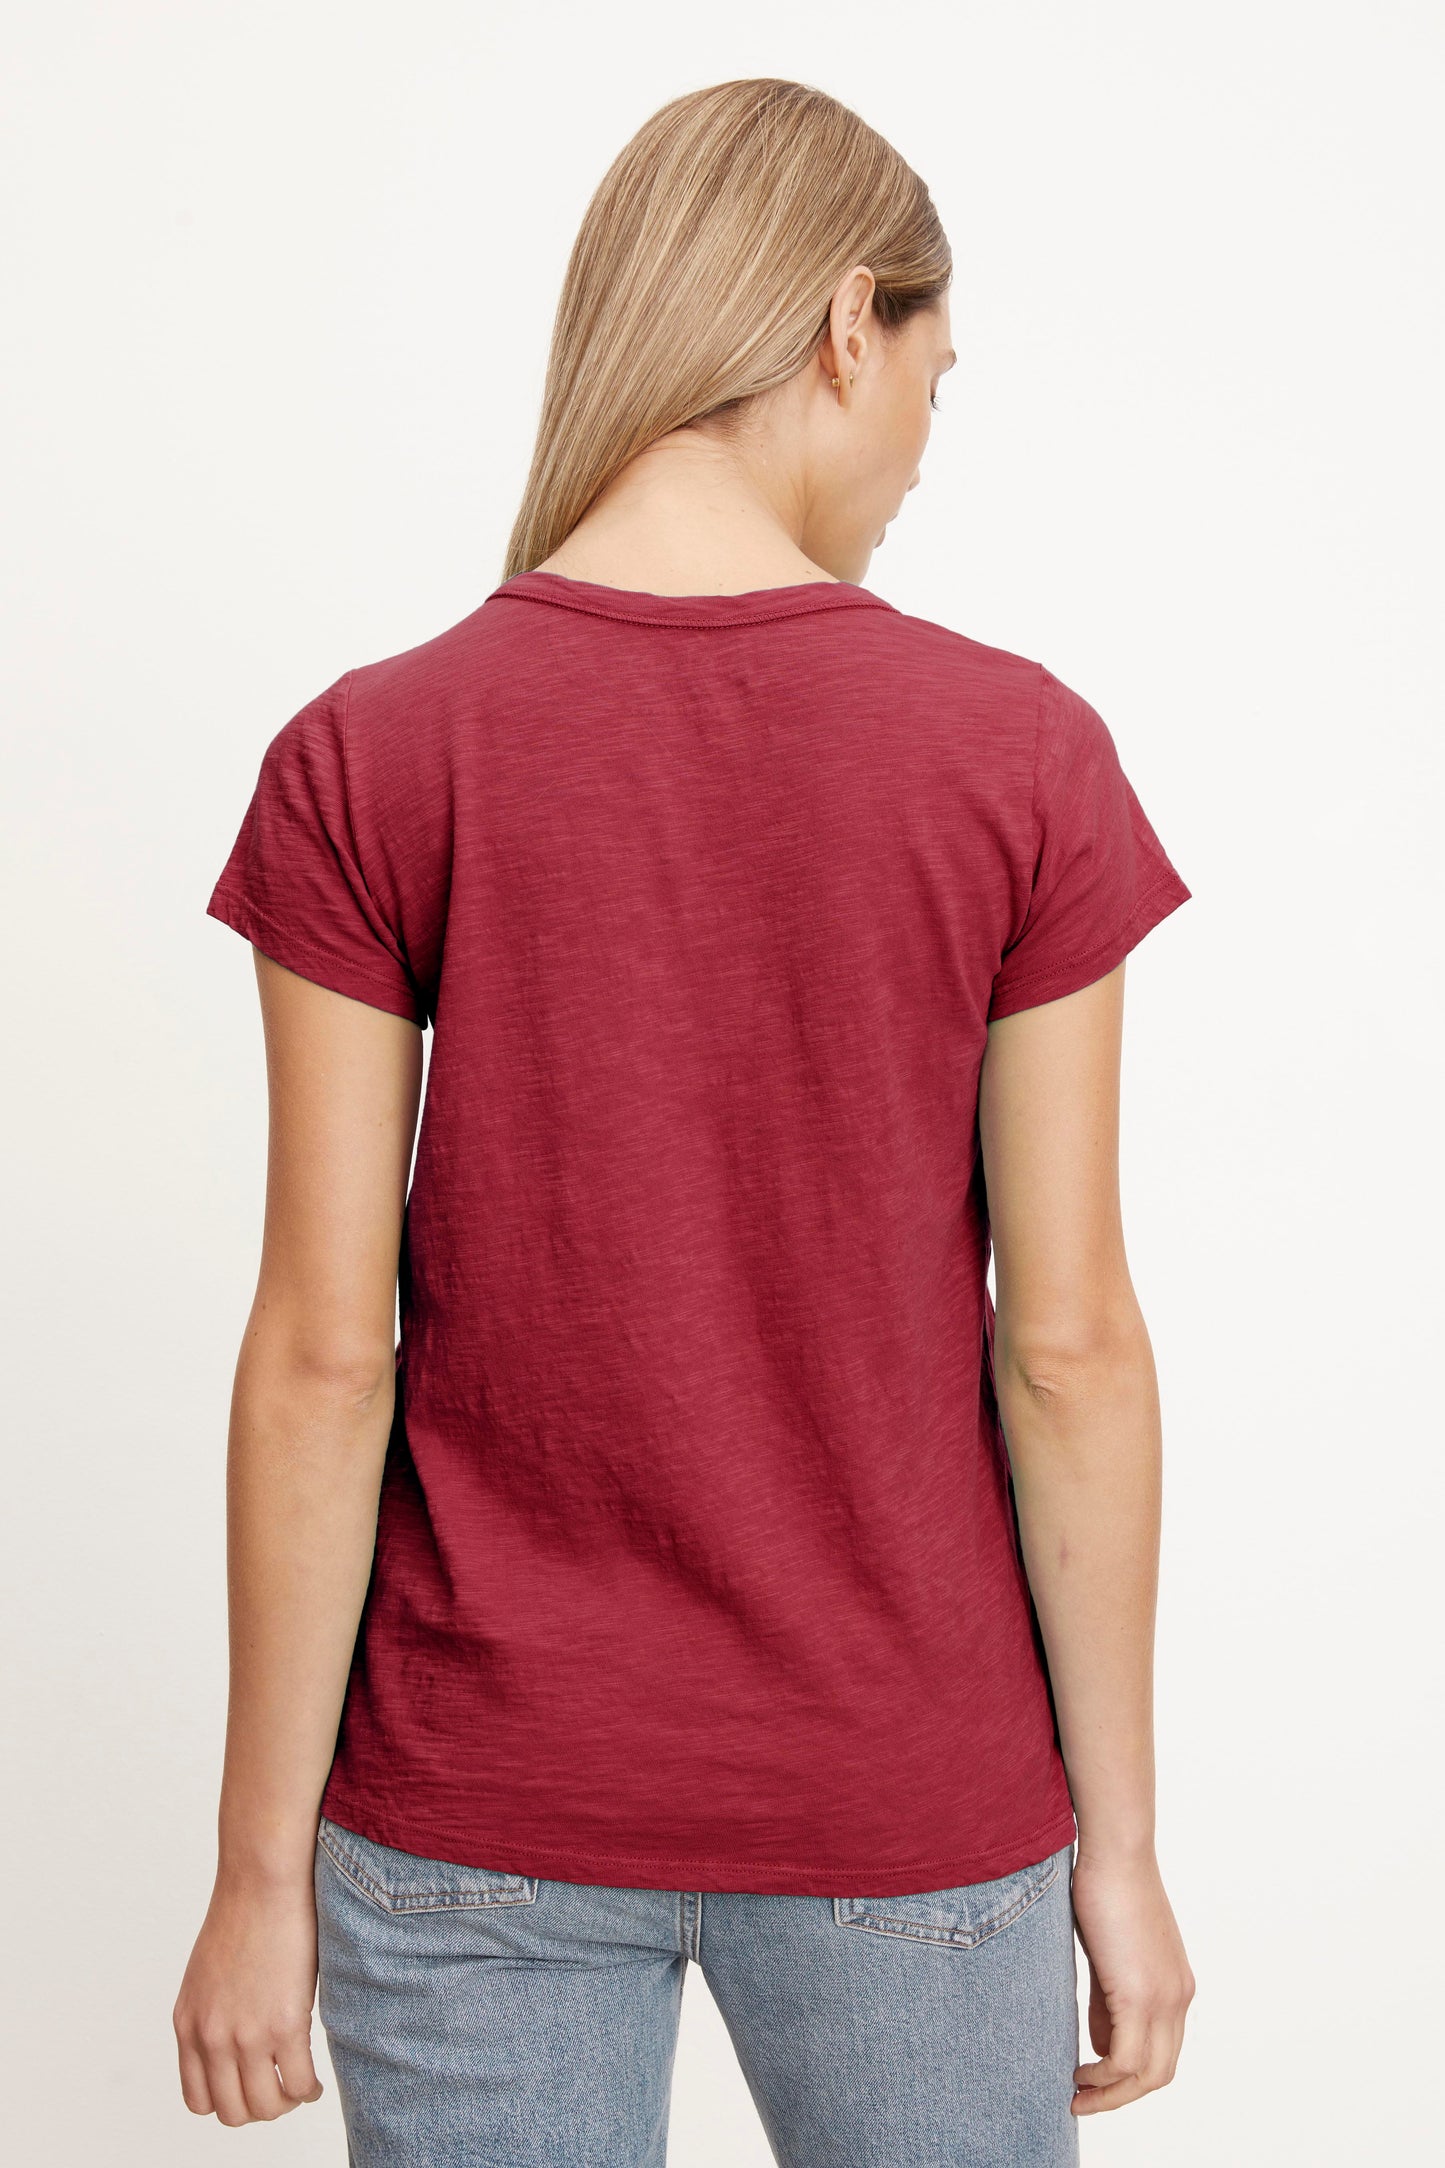 The back view of a woman wearing a Velvet by Graham & Spencer TILLY ORIGINAL SLUB CREW NECK TEE.-26883540353217